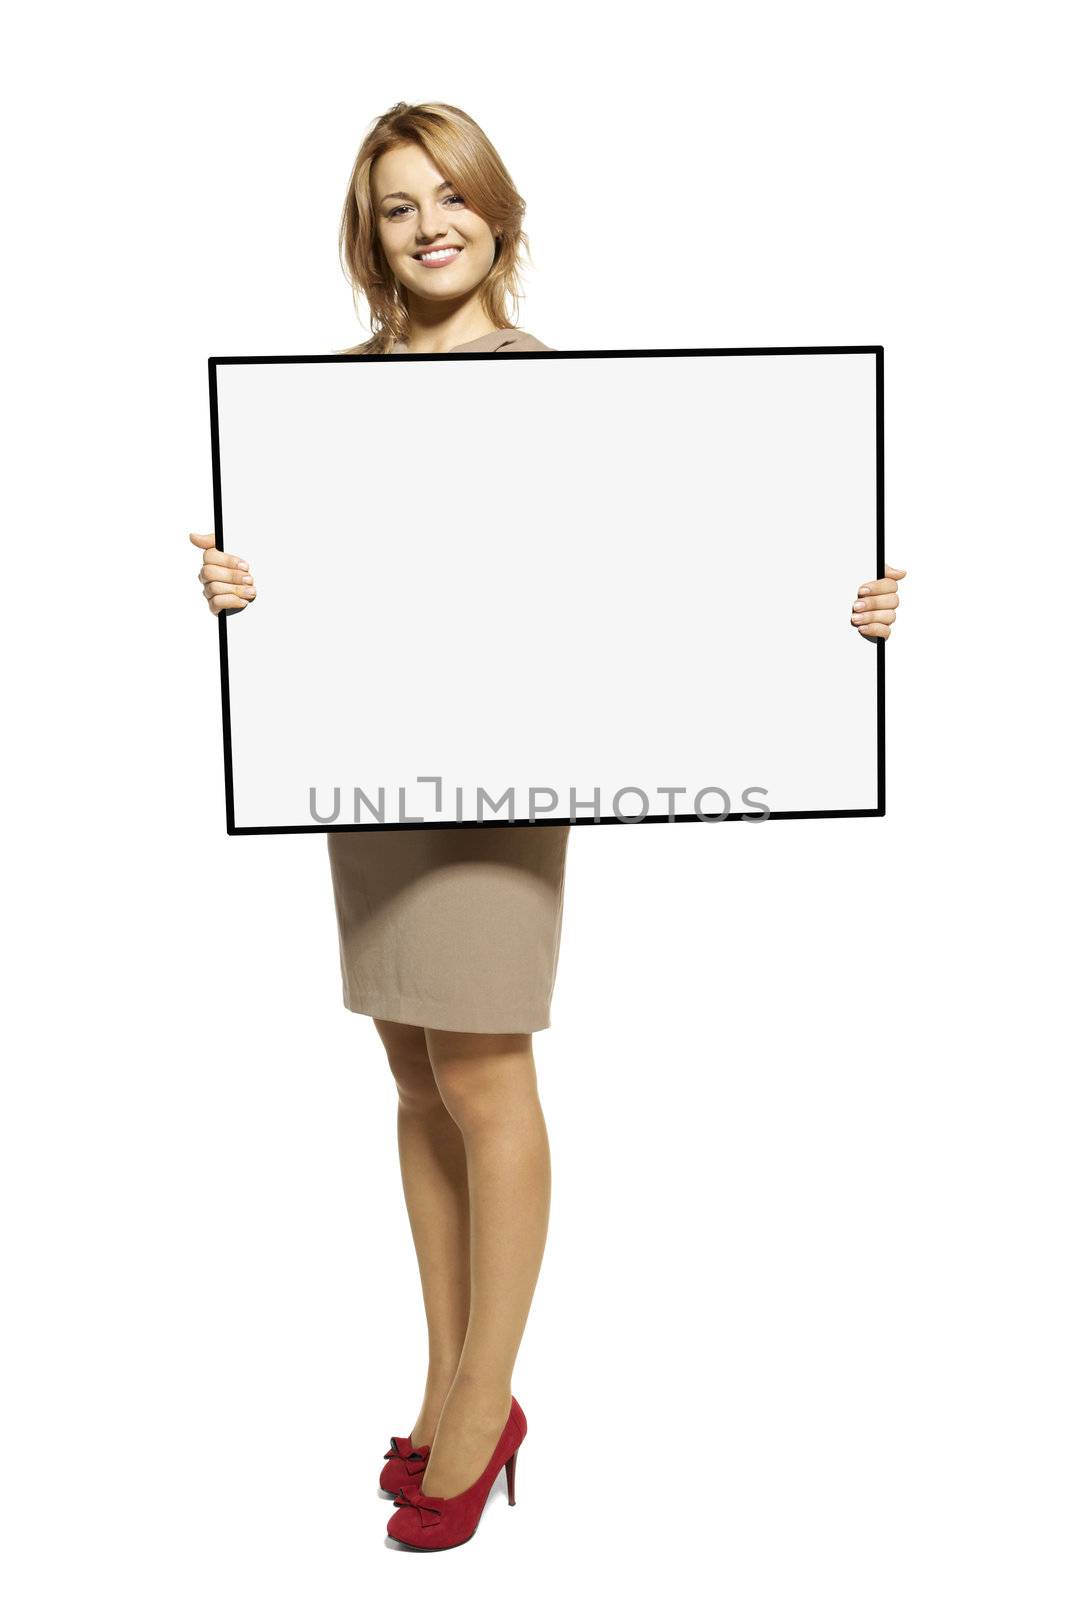 Attractive Young Woman Holding Up a Blank Sign. Studio shot of woman isolated on white background.